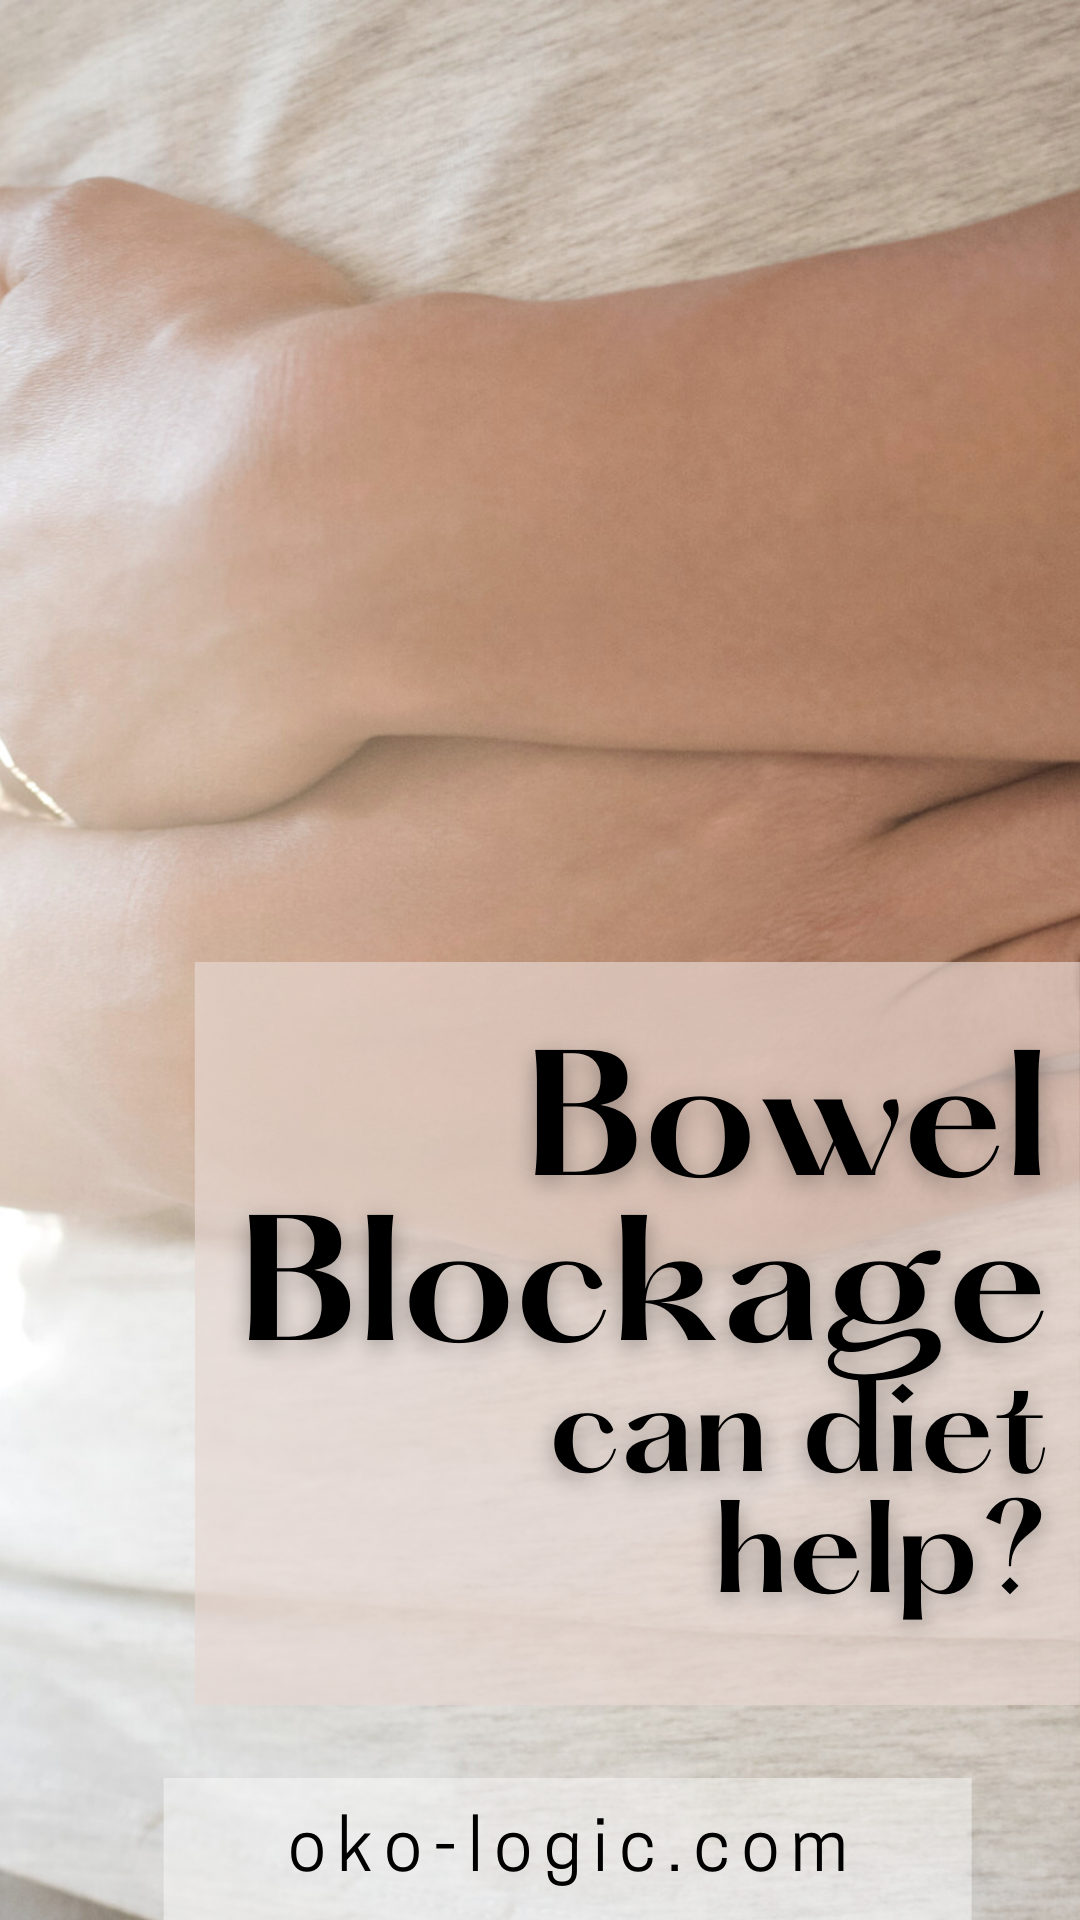 What Is Twisted Bowel and How Can a Bowel Adhesion Diet Help?